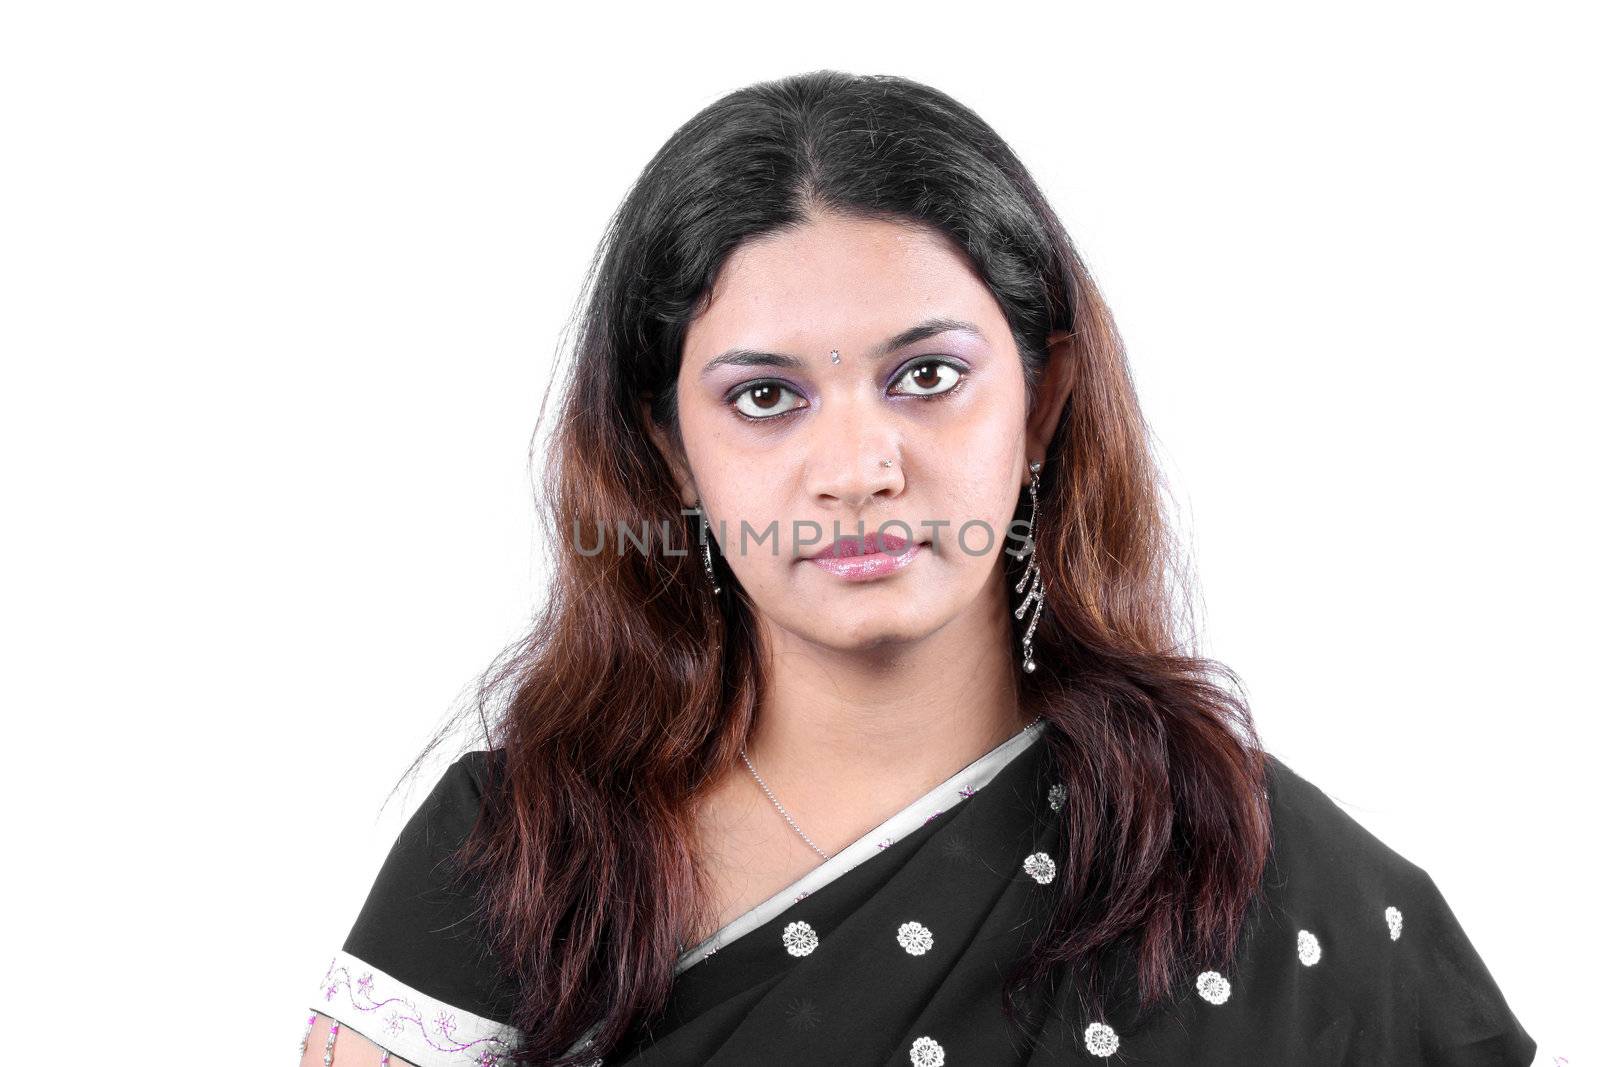 A portrait of an angry Indian woman wearing a traditional black sari, on white studio background.